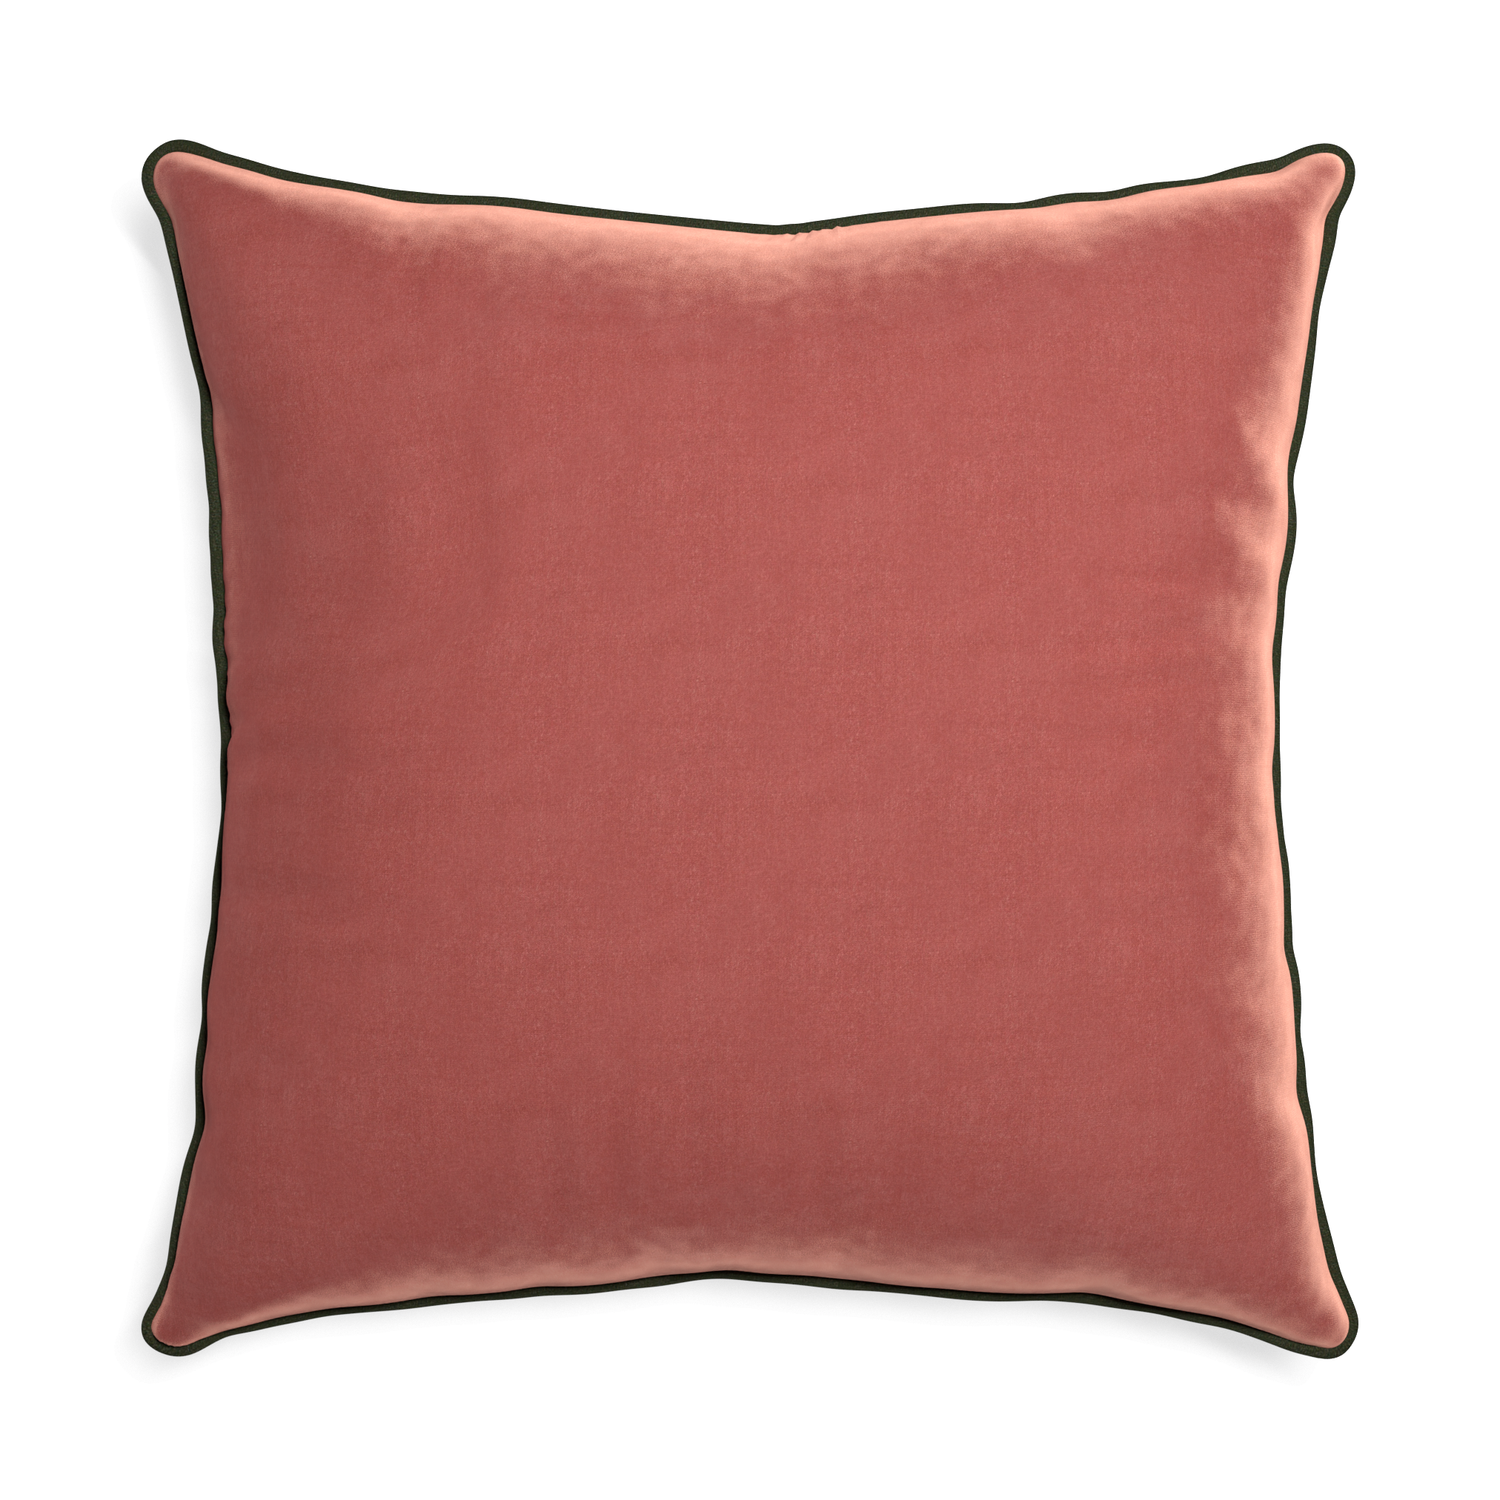 Euro-sham cosmo velvet custom coralpillow with f piping on white background